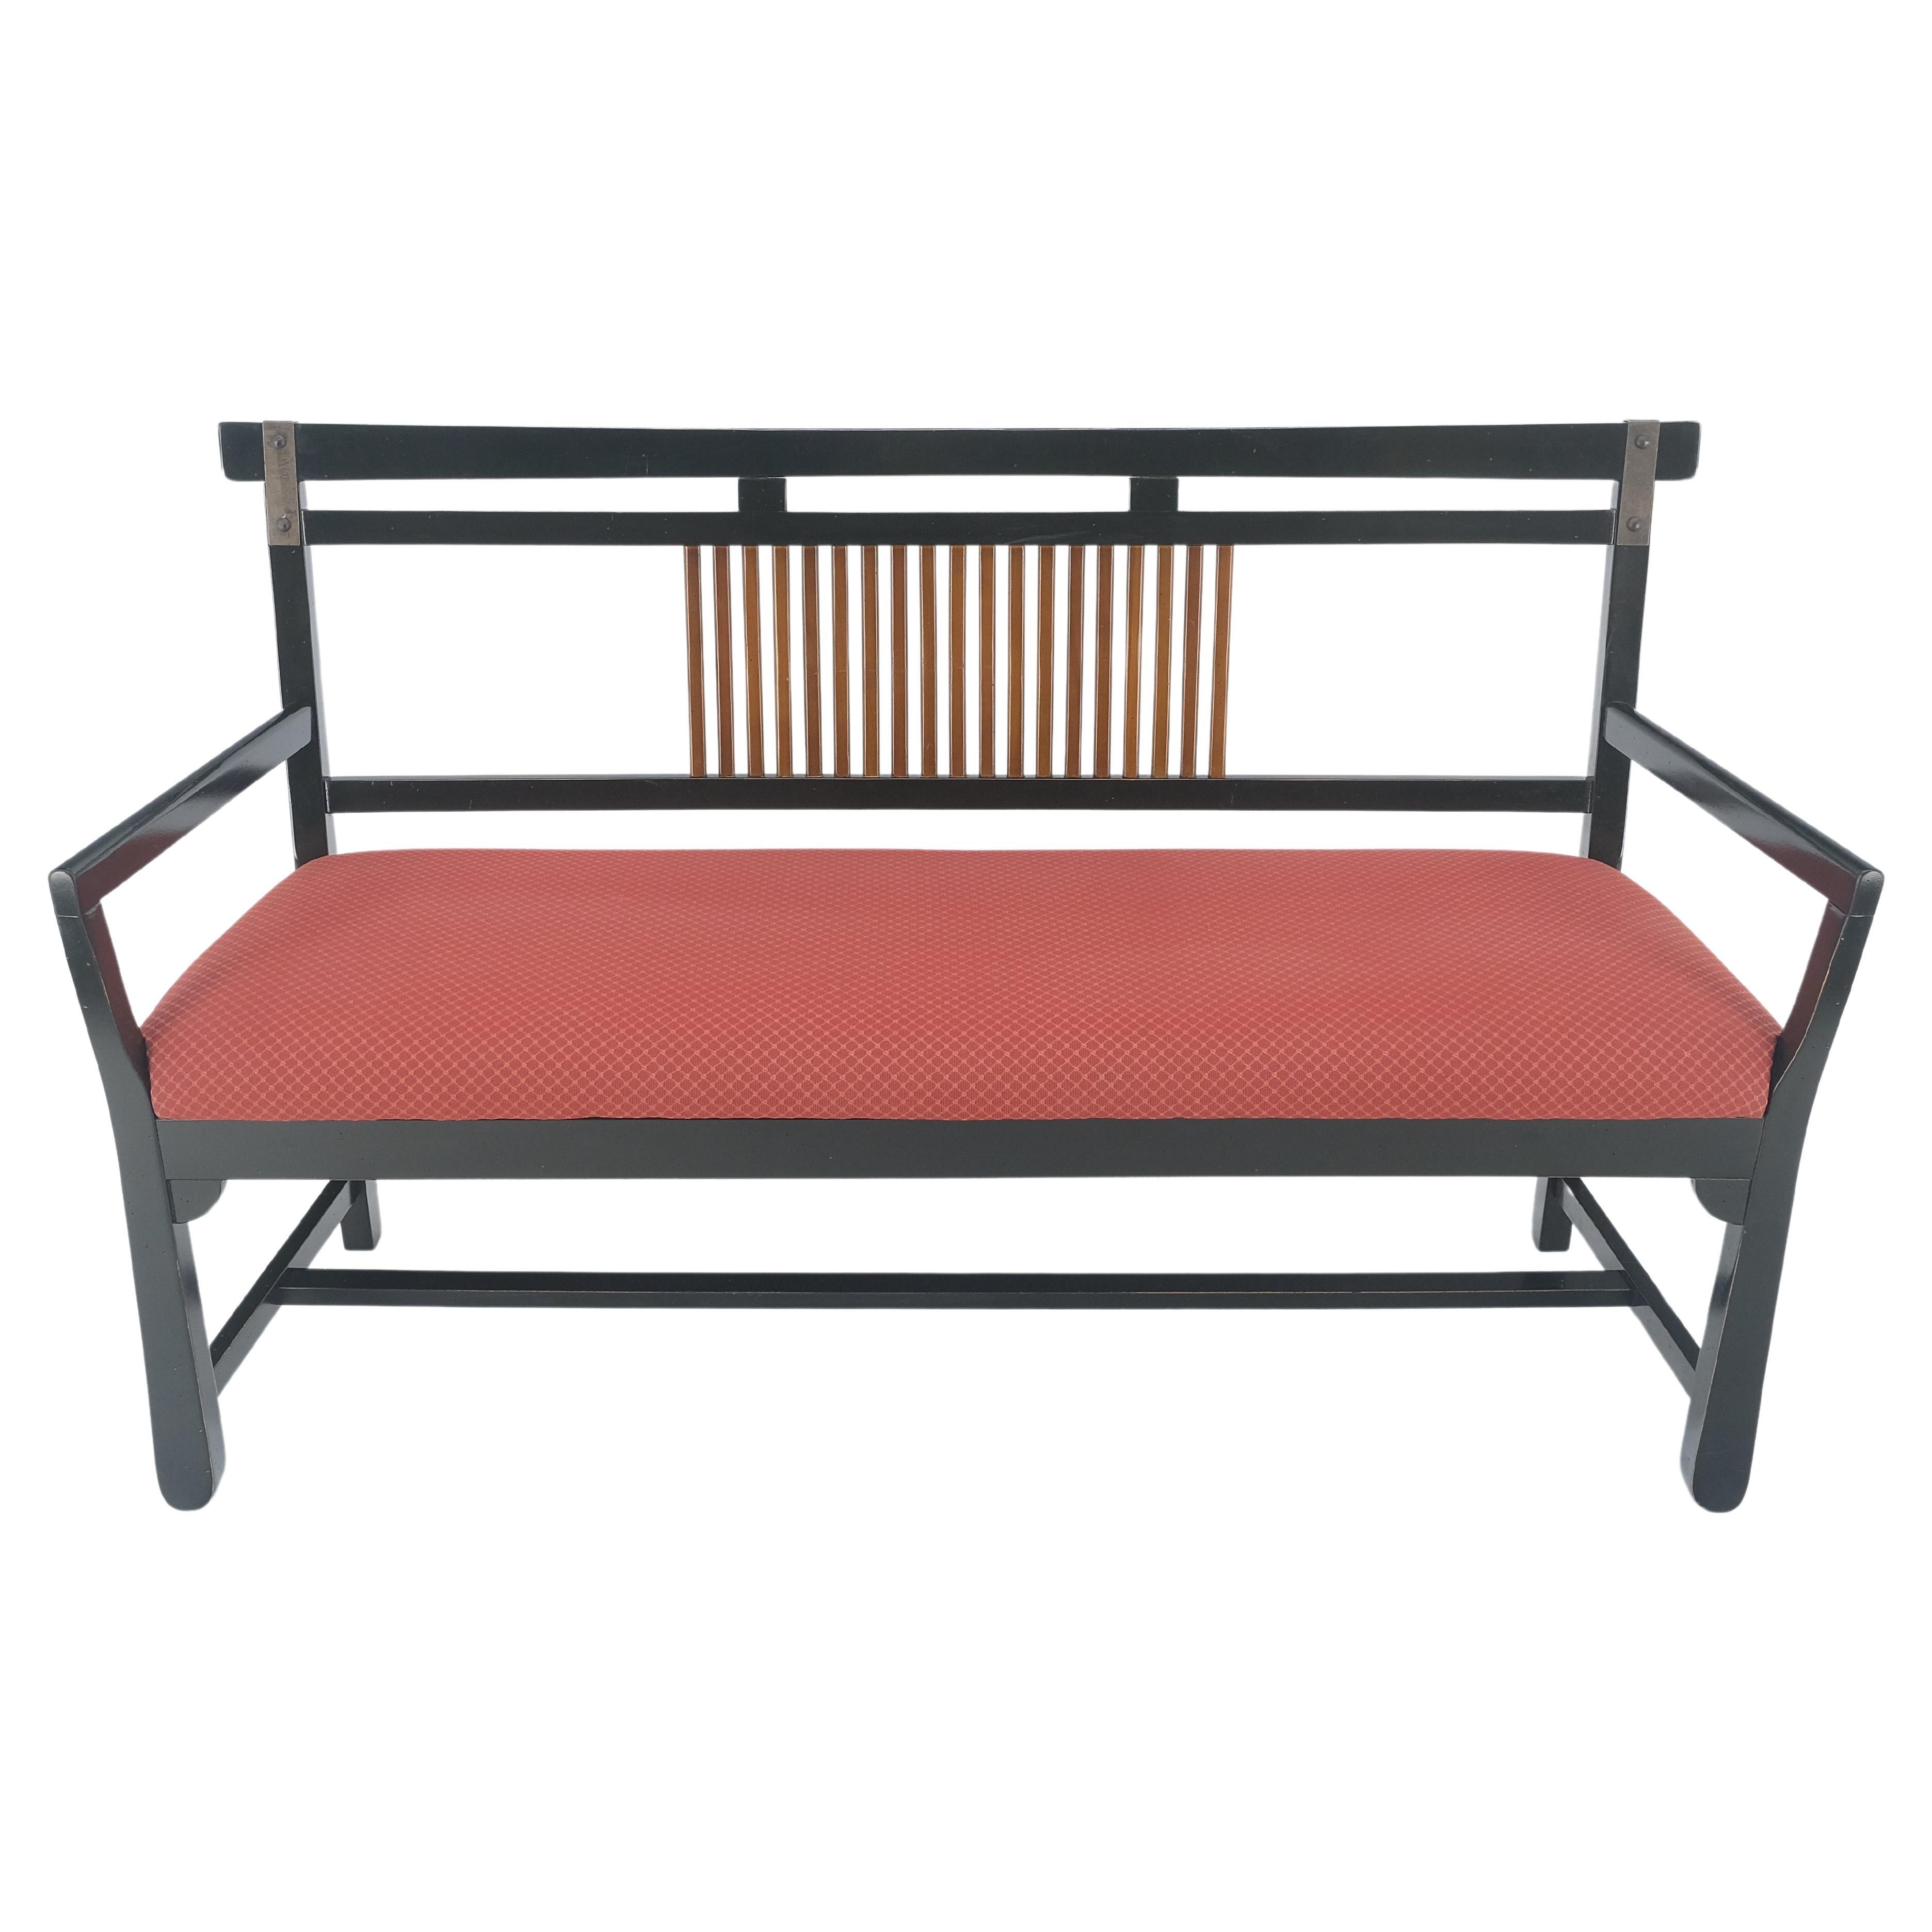 Vintage Black Lacquer Red Upholstery Bench w/ Arms Slotted Back MINT For Sale